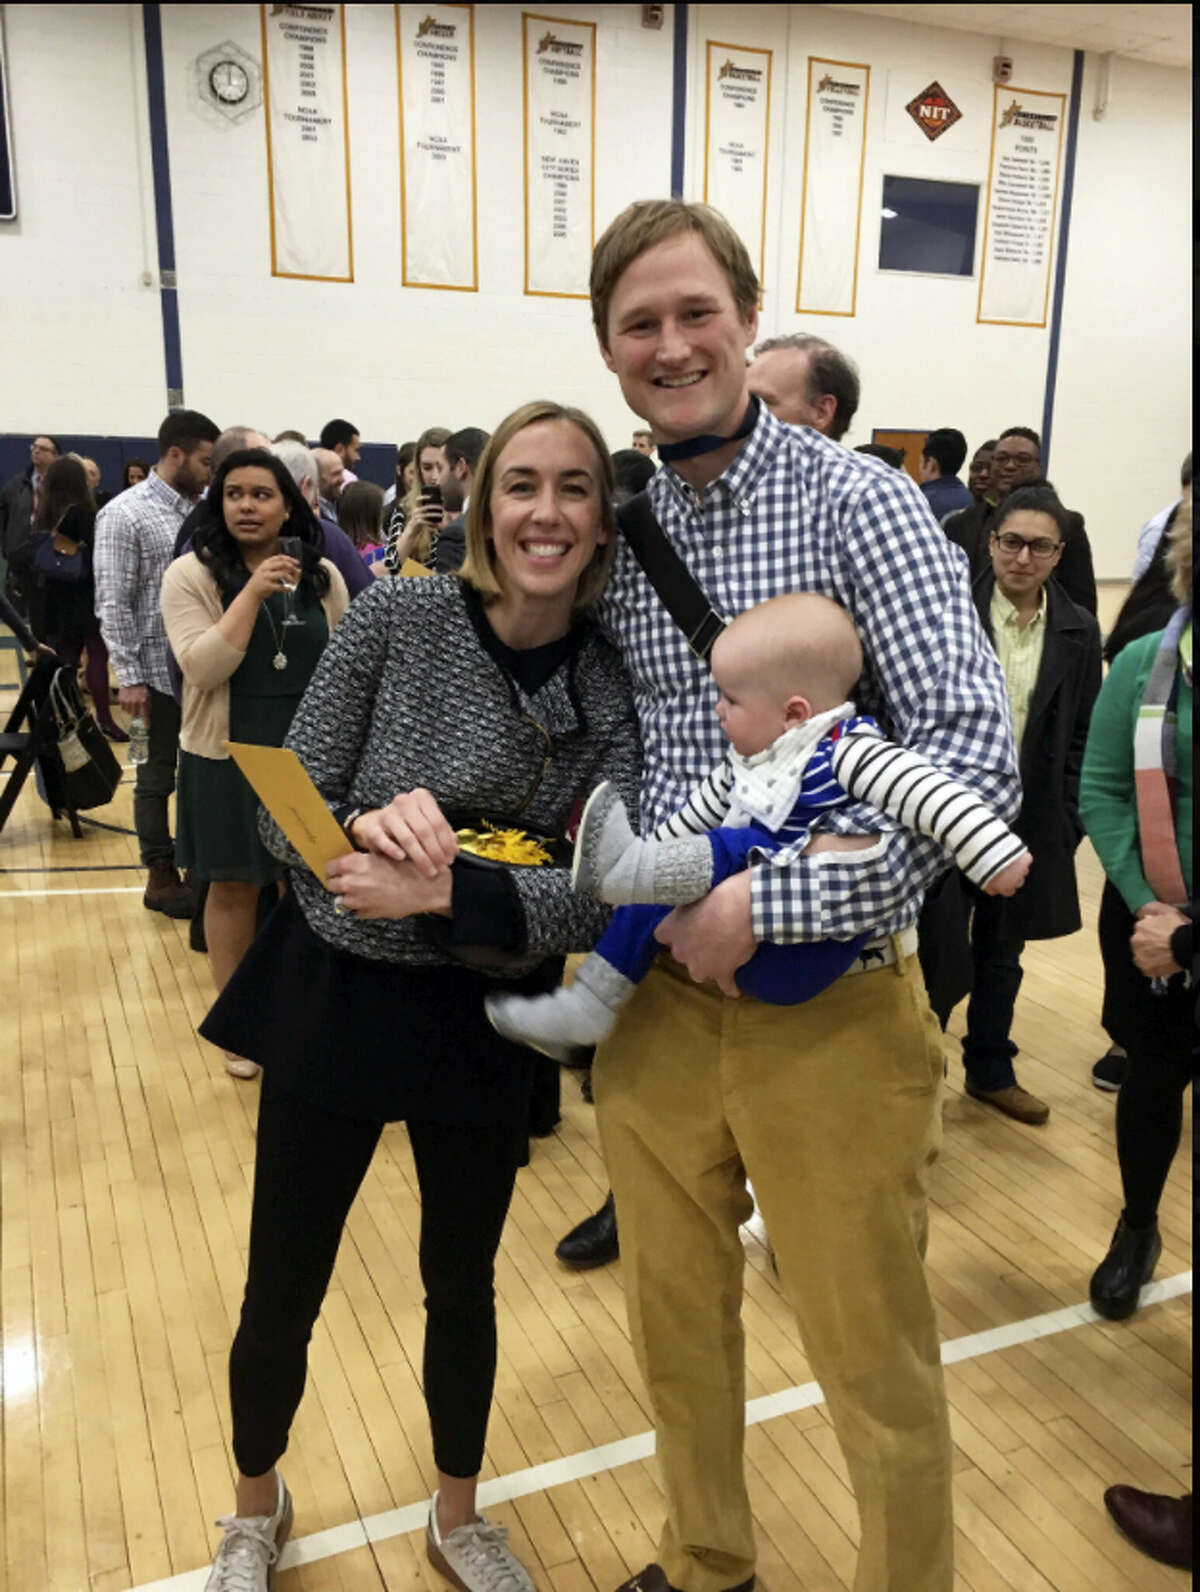 Abigail Gurall, husband, Ford, and son, Jack, on Match Day, when graduating medical students found out what residency program and speciality they were matched to.